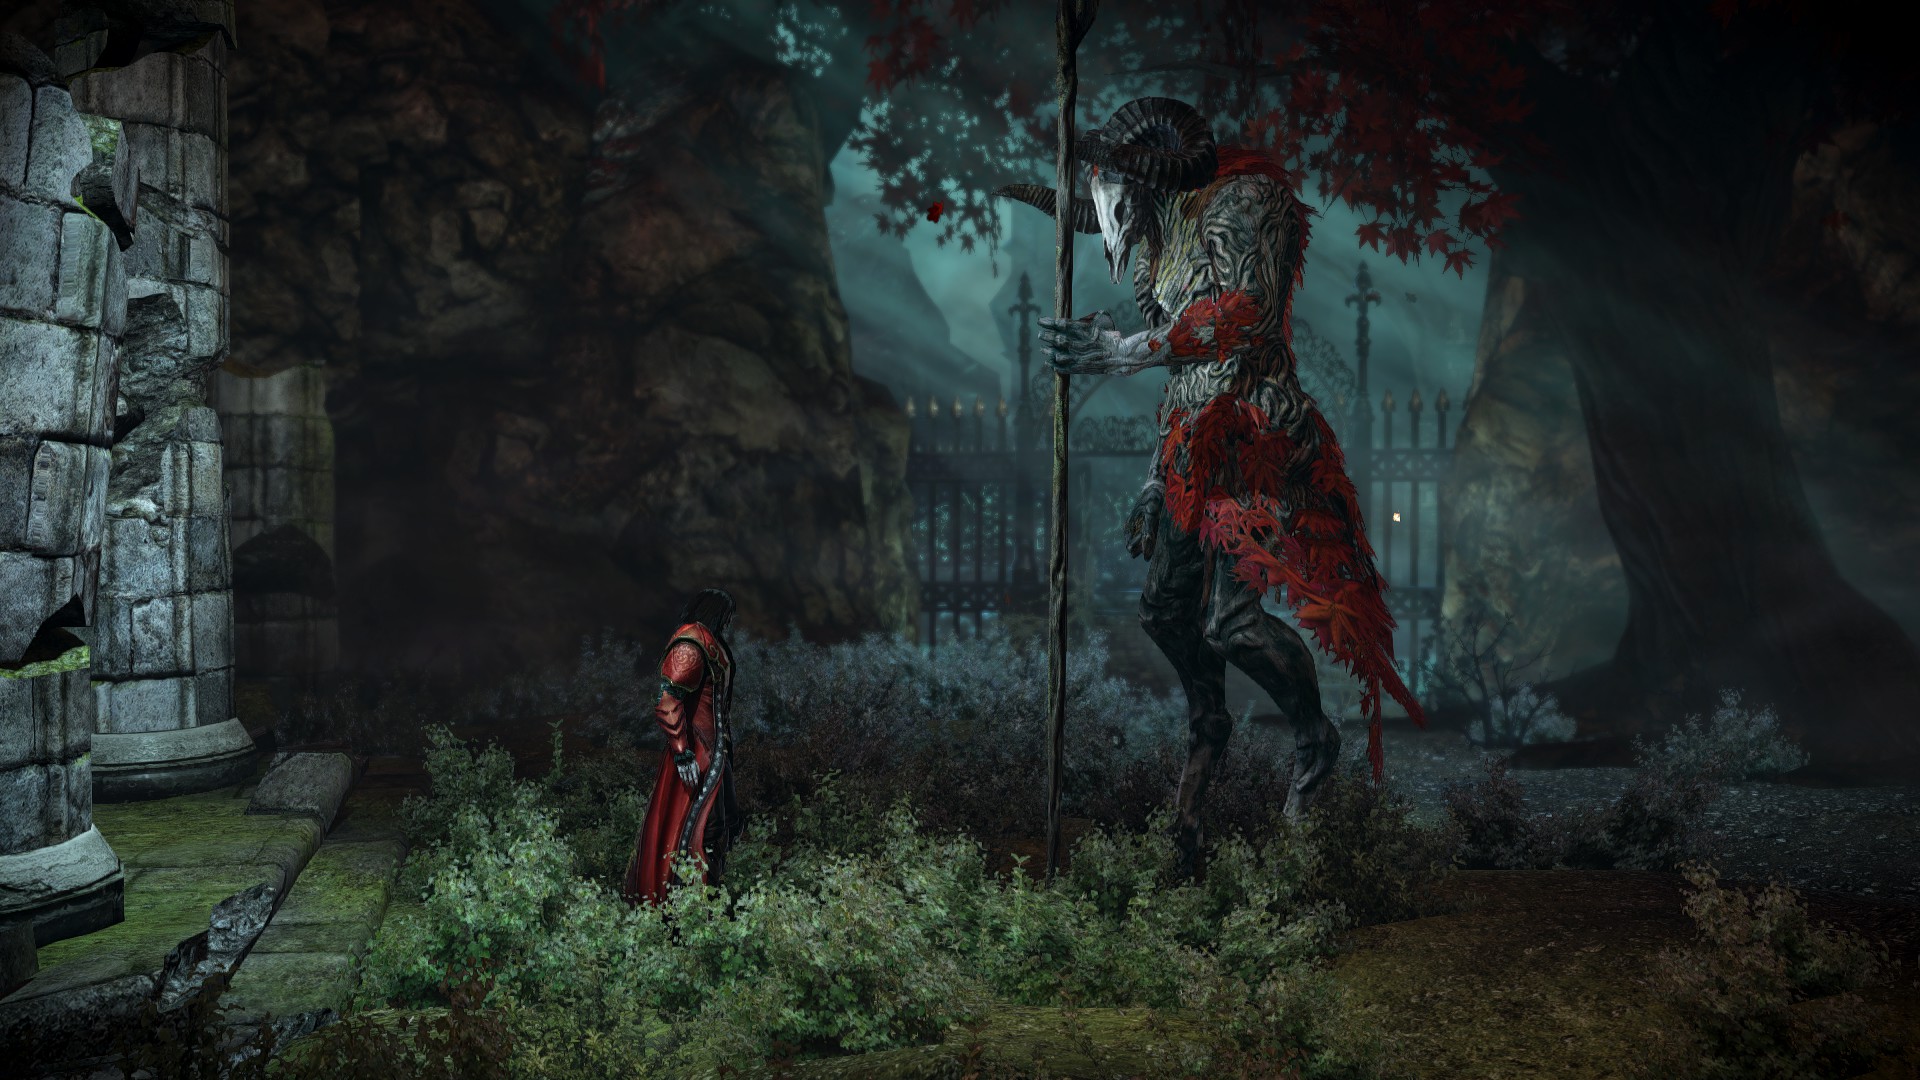 Castlevania Lords of Shadow 2